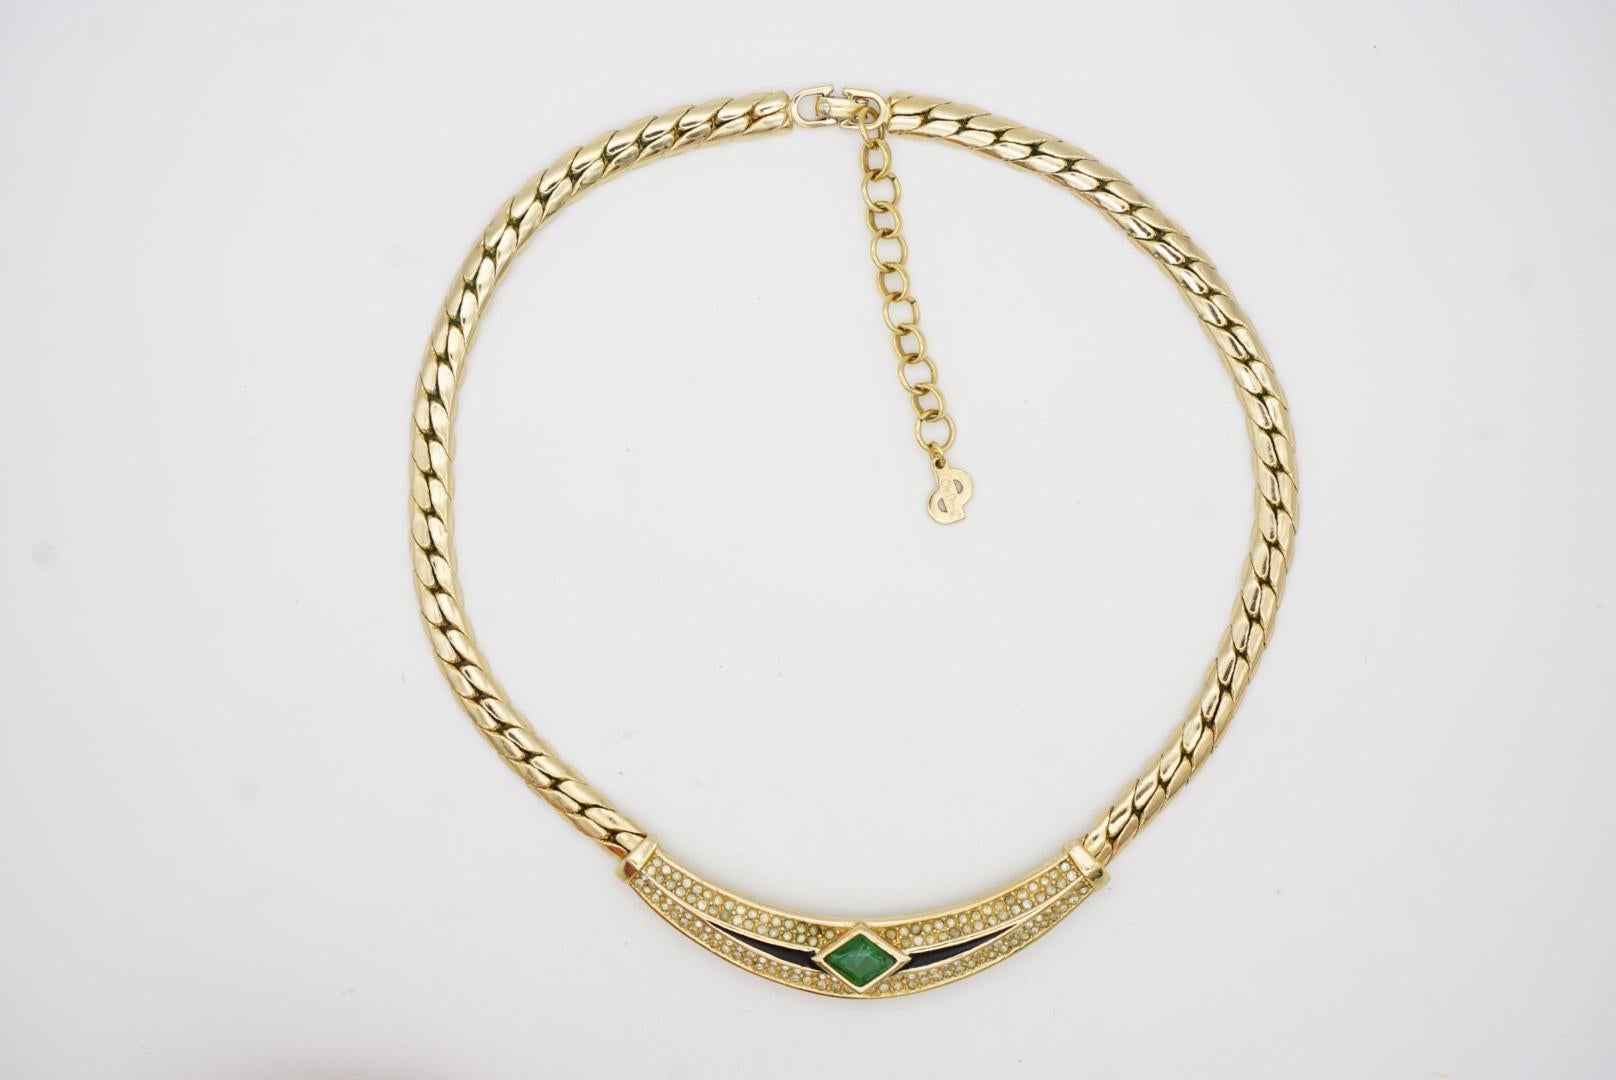 Christian Dior Vintage 1980s Emerald Green Gripoix Black Crystals Gold Necklace For Sale 4